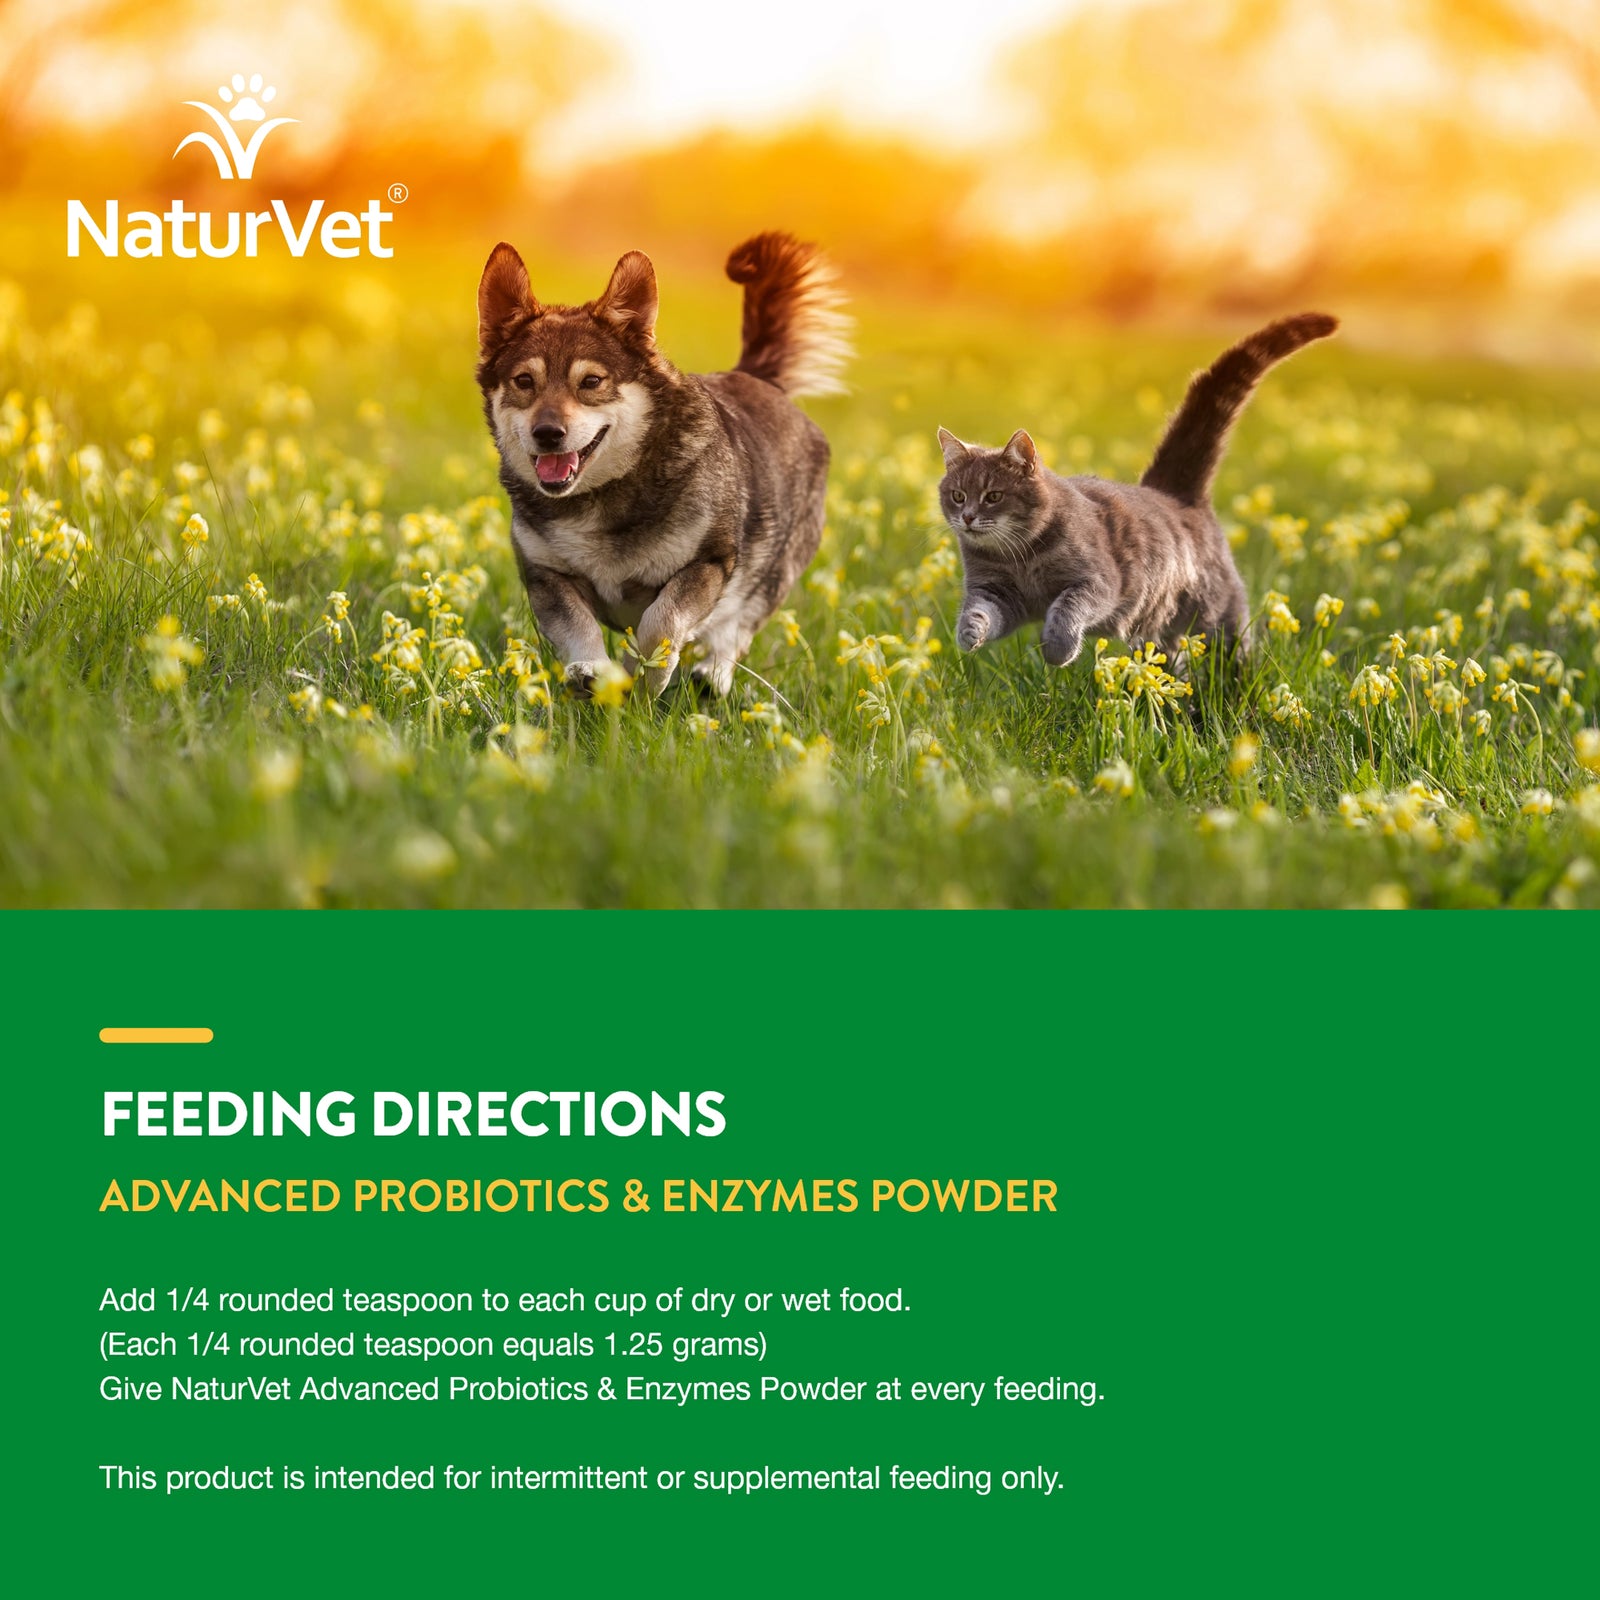 NaturVet Advanced Probiotic & Enzymes Powder for Dogs and Cats